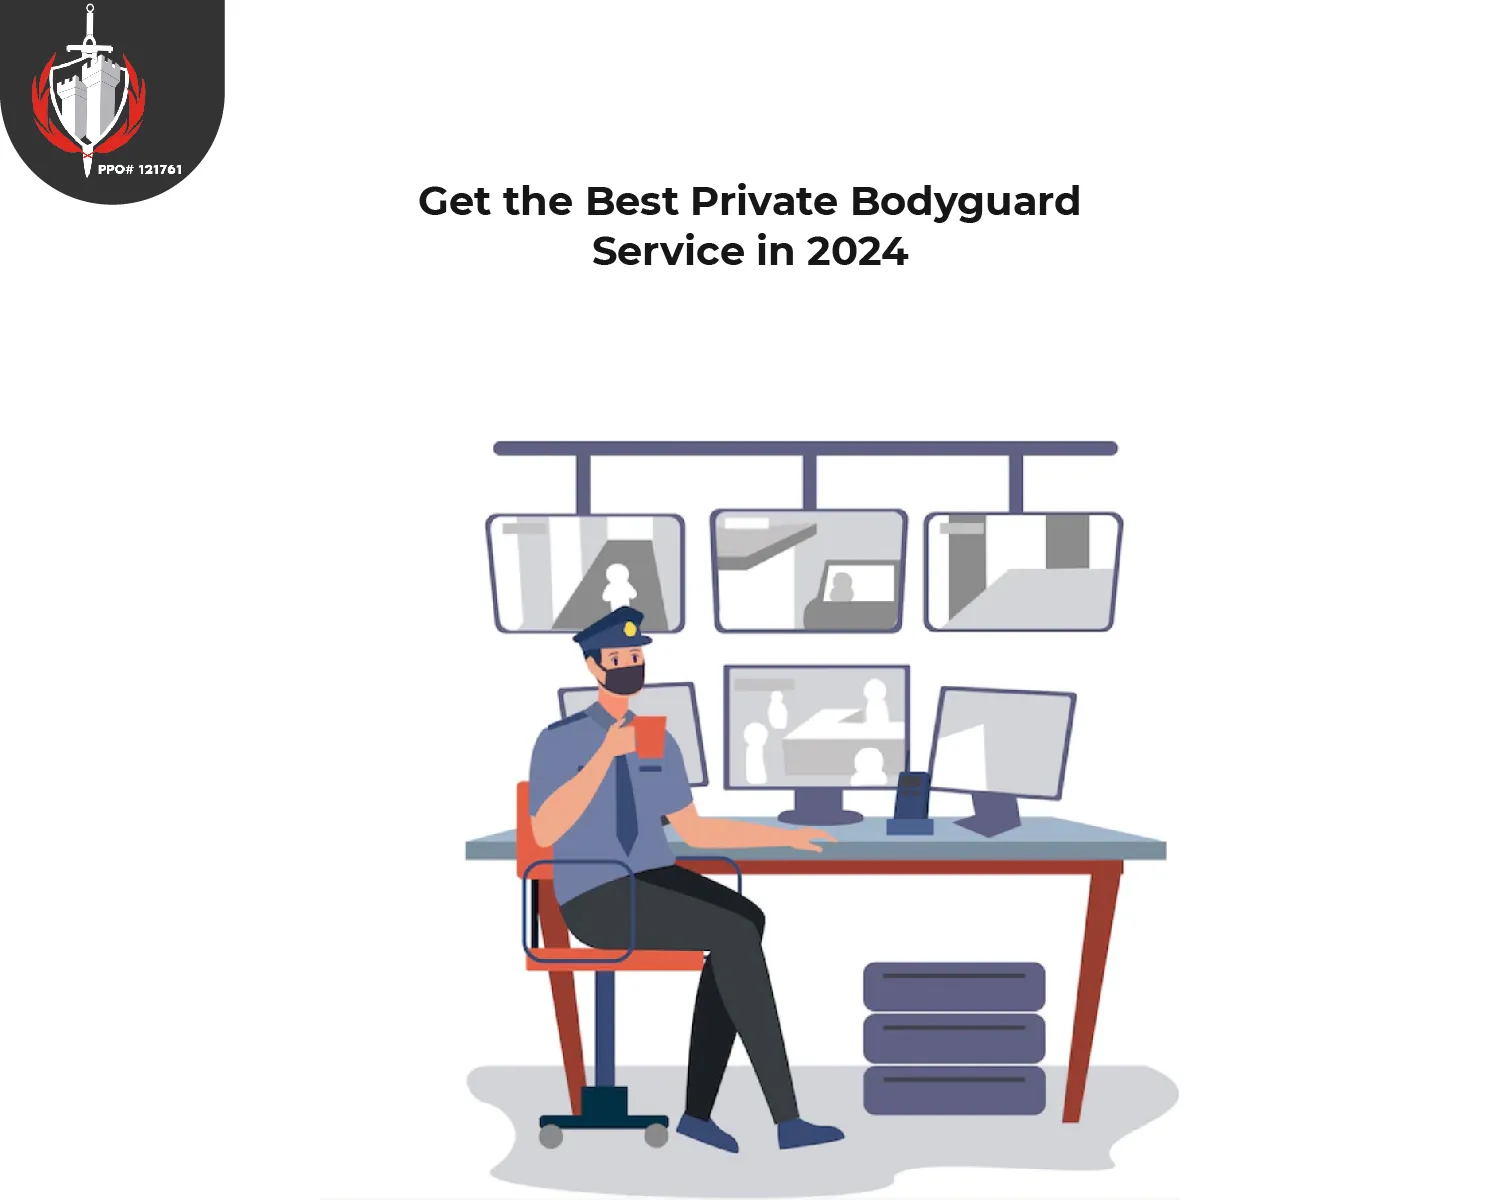 Get the Best Private Bodyguard Service in 2024